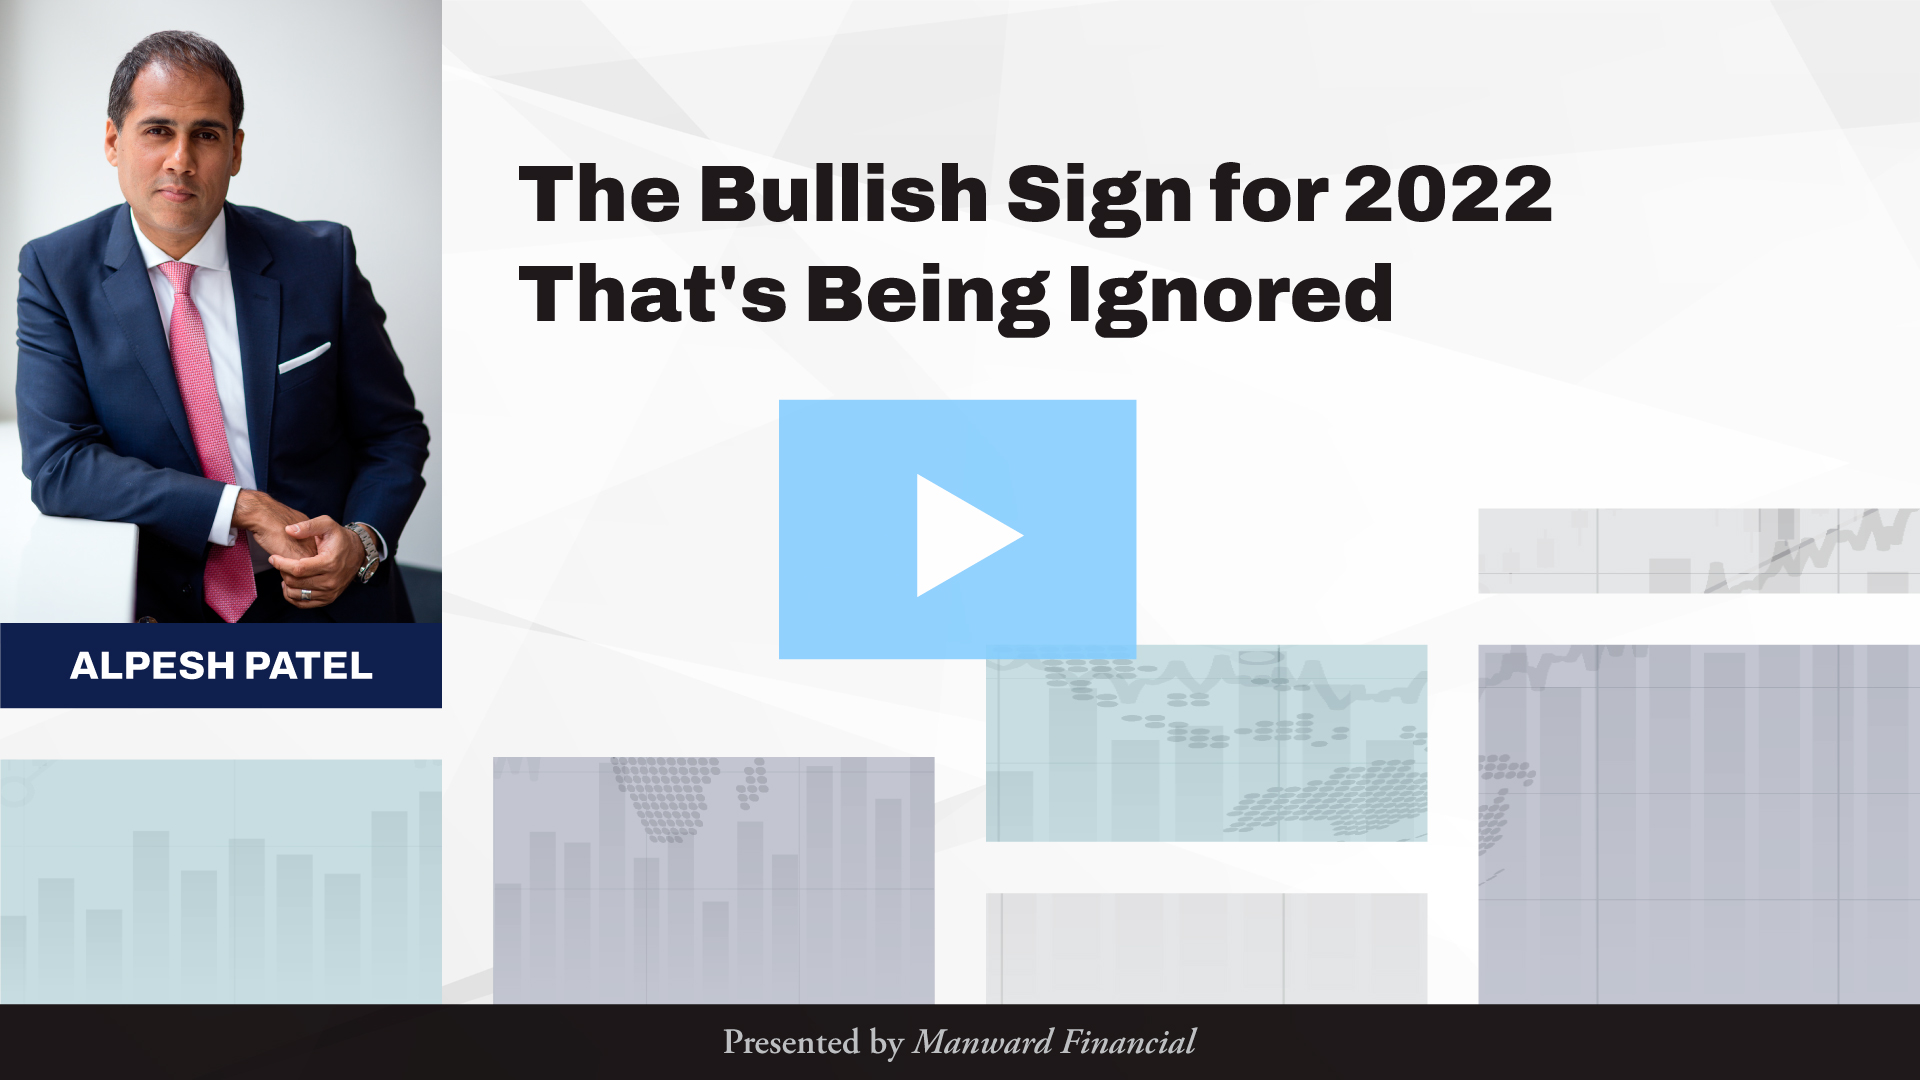 The Bullish Sign for 2022 That’s Being Ignored